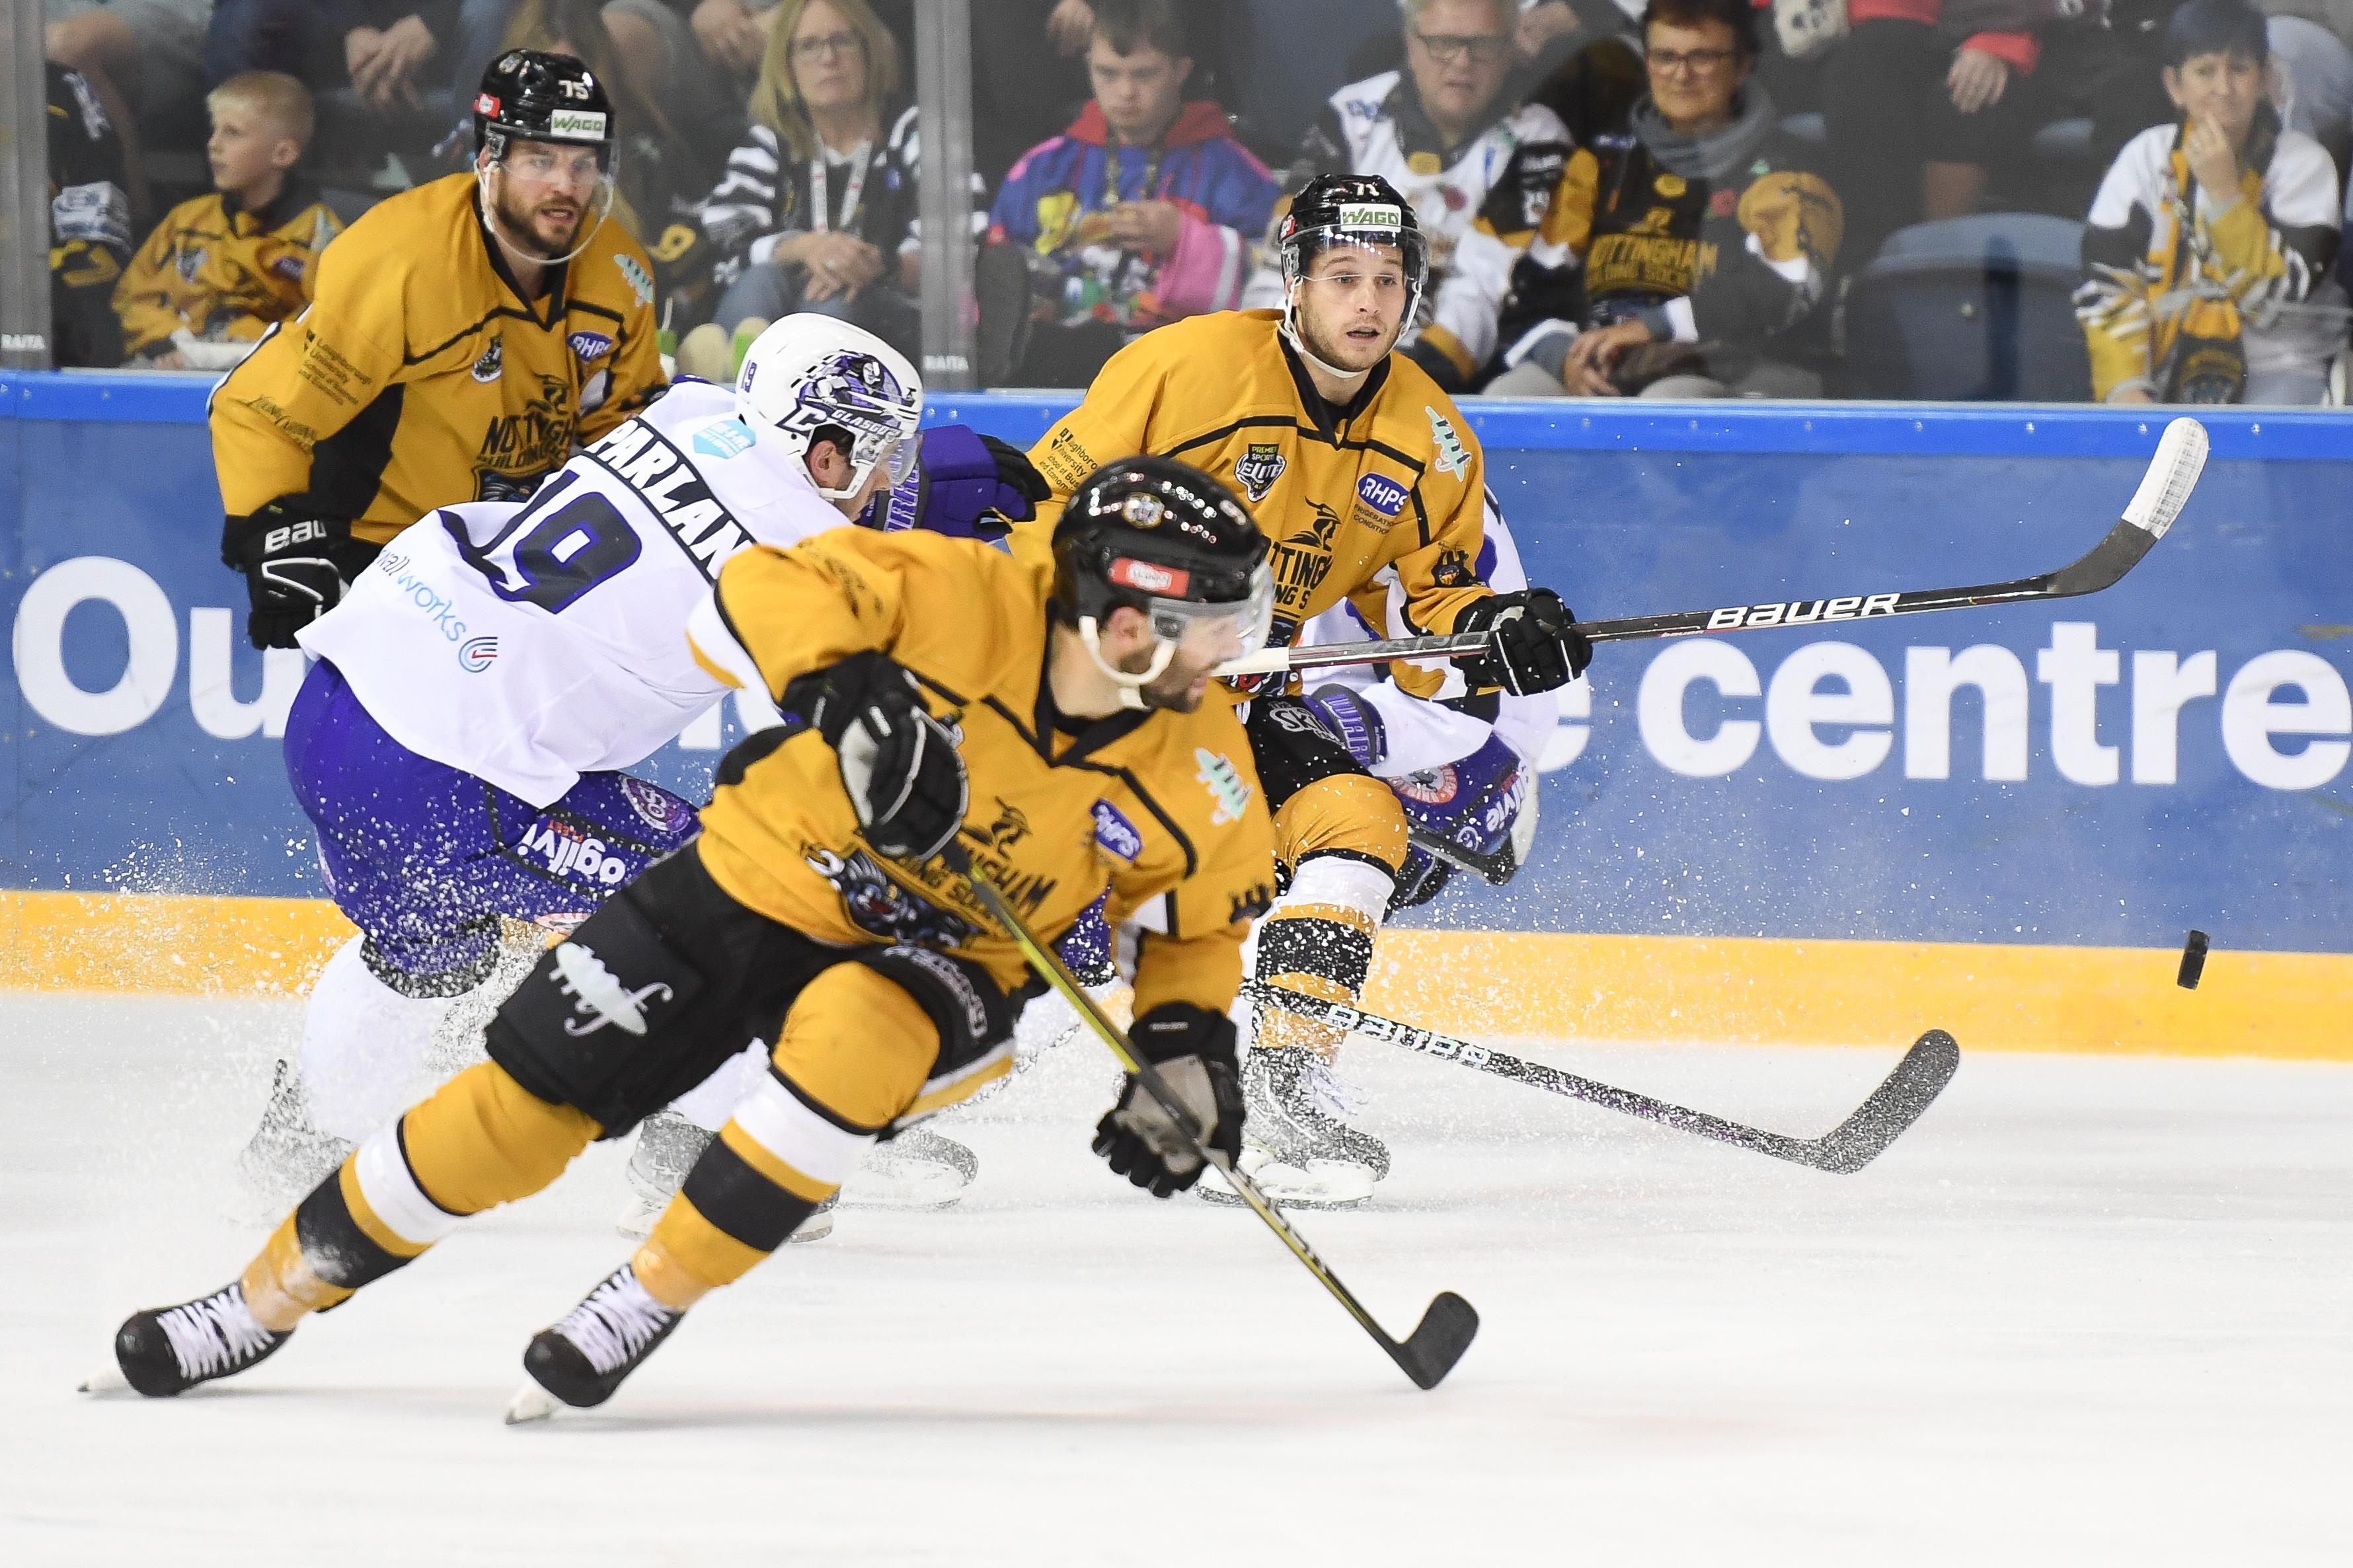 RELIVE WEDNESDAY'S WIN OVER THE CLAN Top Image